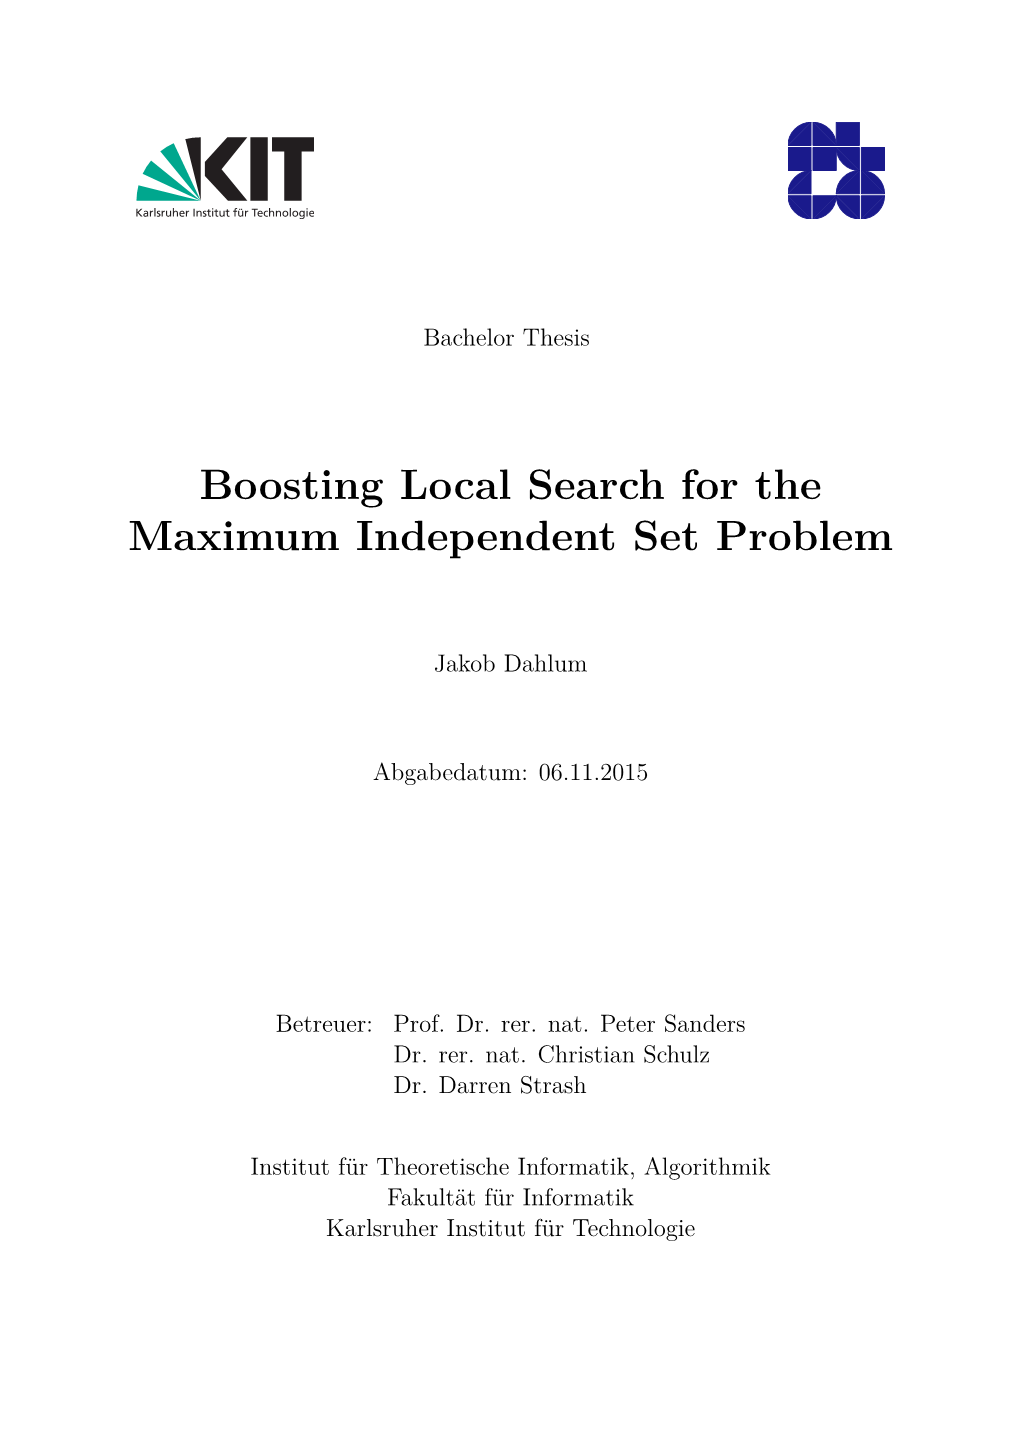 Boosting Local Search for the Maximum Independent Set Problem